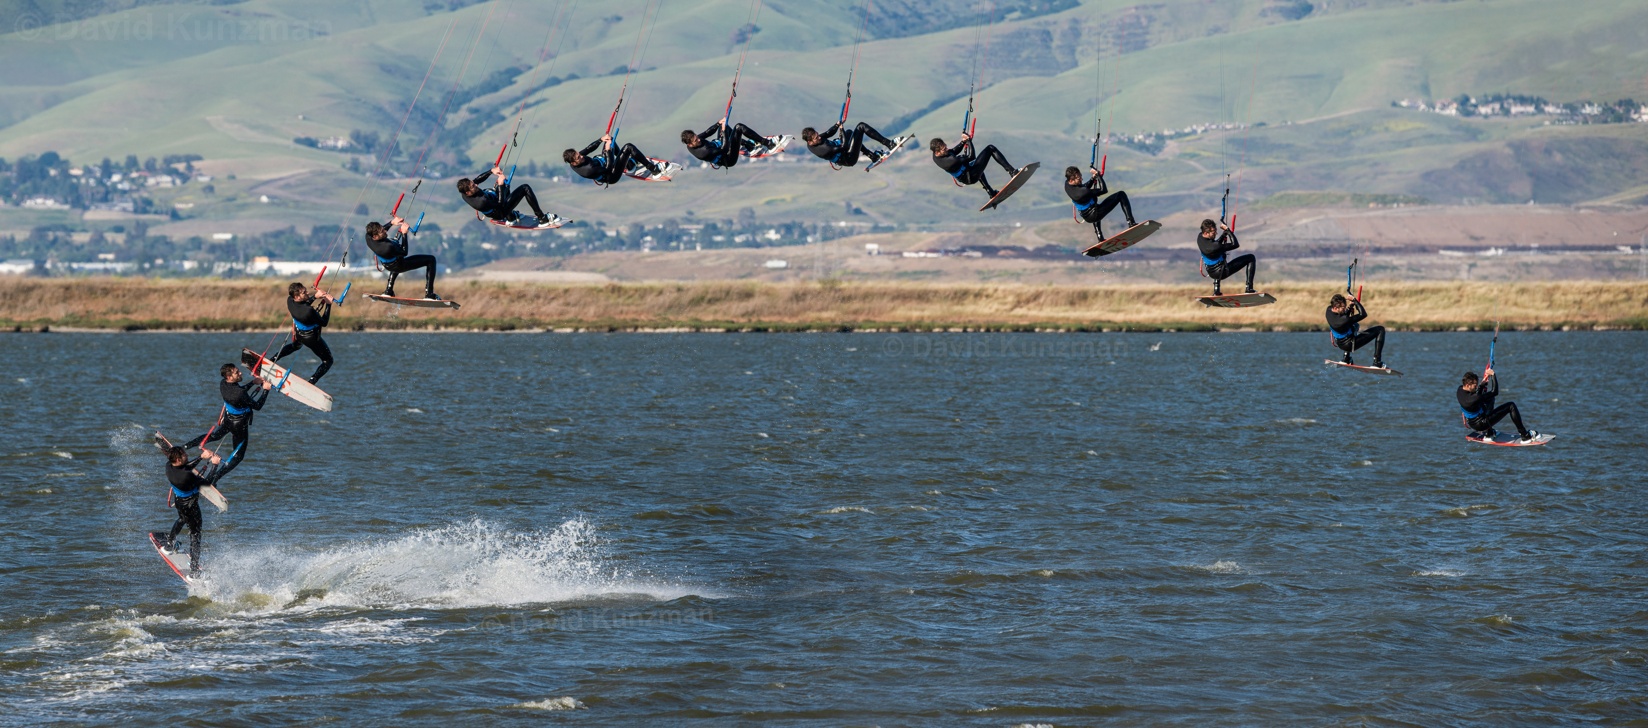 A composite photograph showing a kitesurfer flying high through the air.